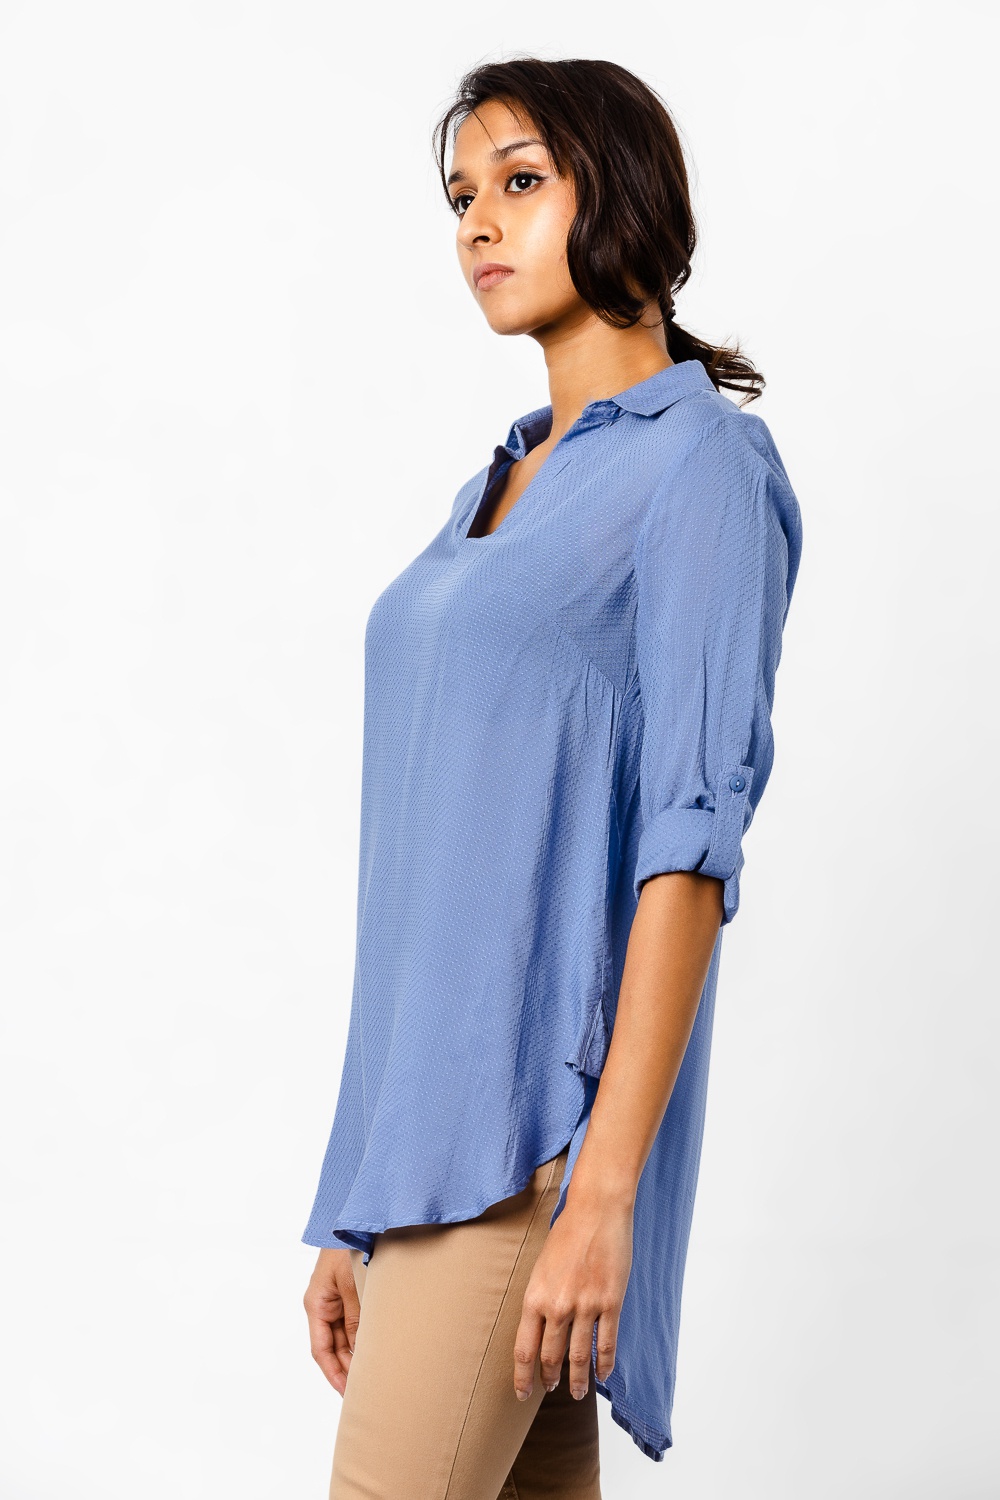 Odel Blue Tunic Top